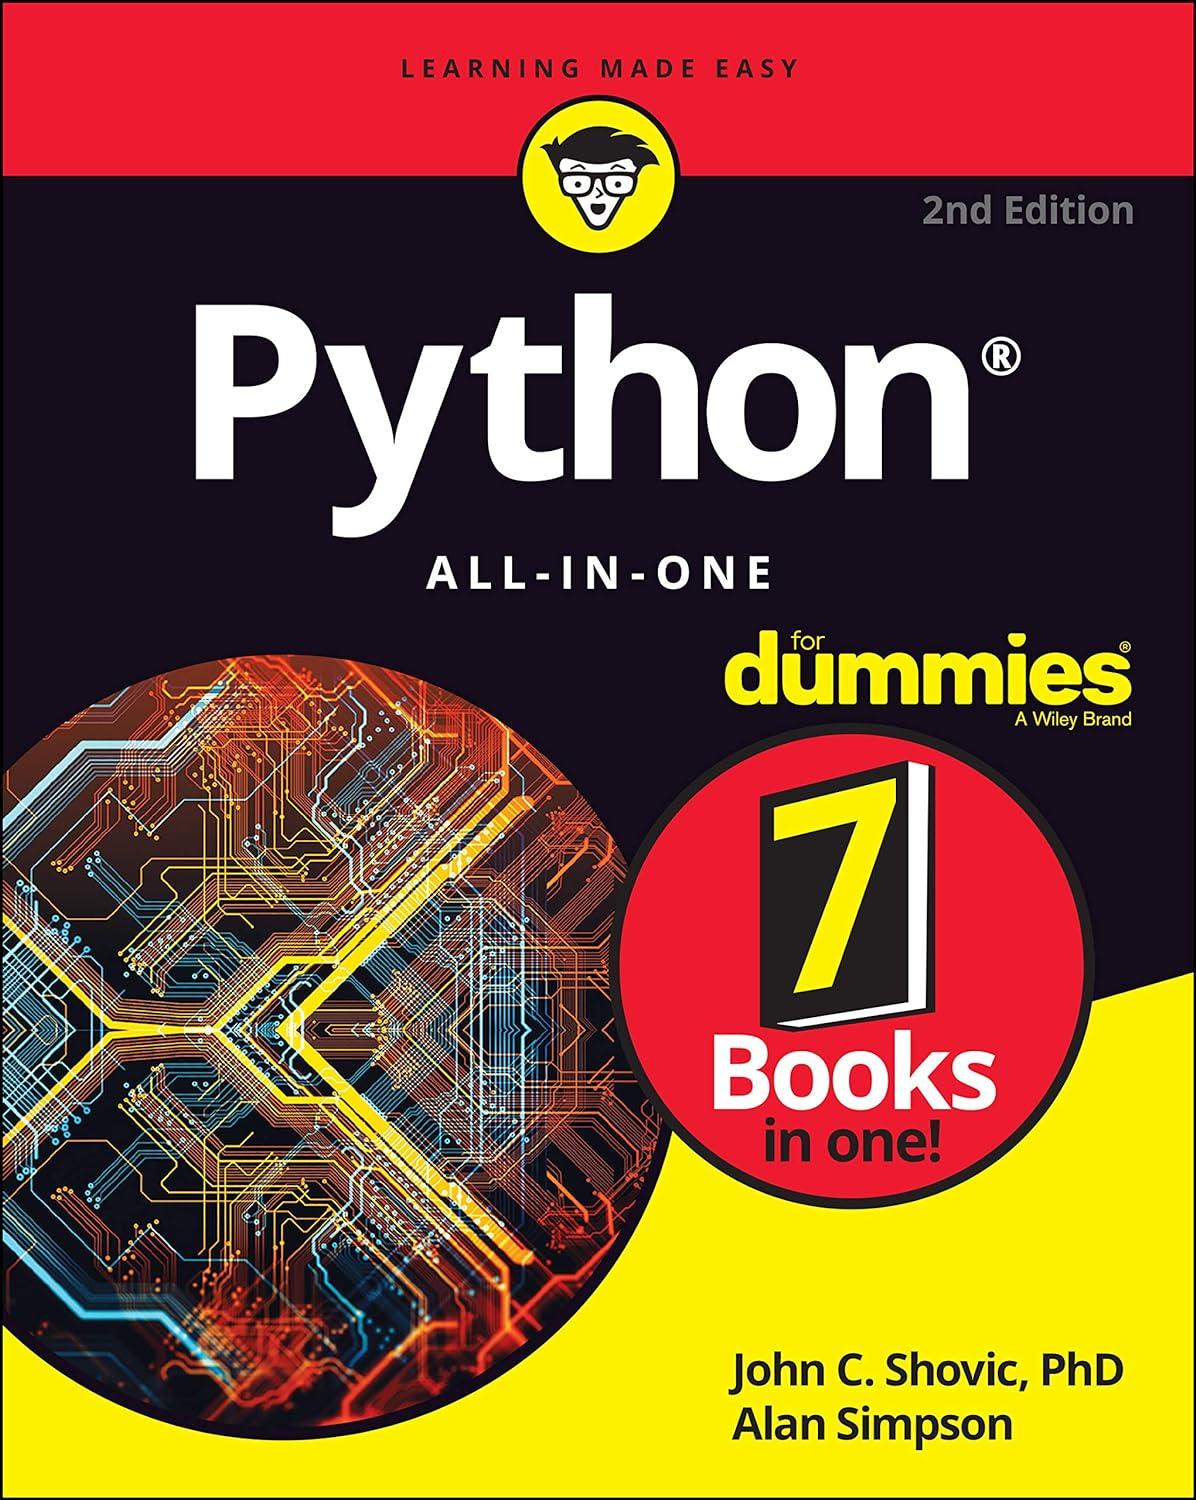 python all in one for dummies 2nd edition john c. shovic, alan simpson 1119787602, 978-1119787600